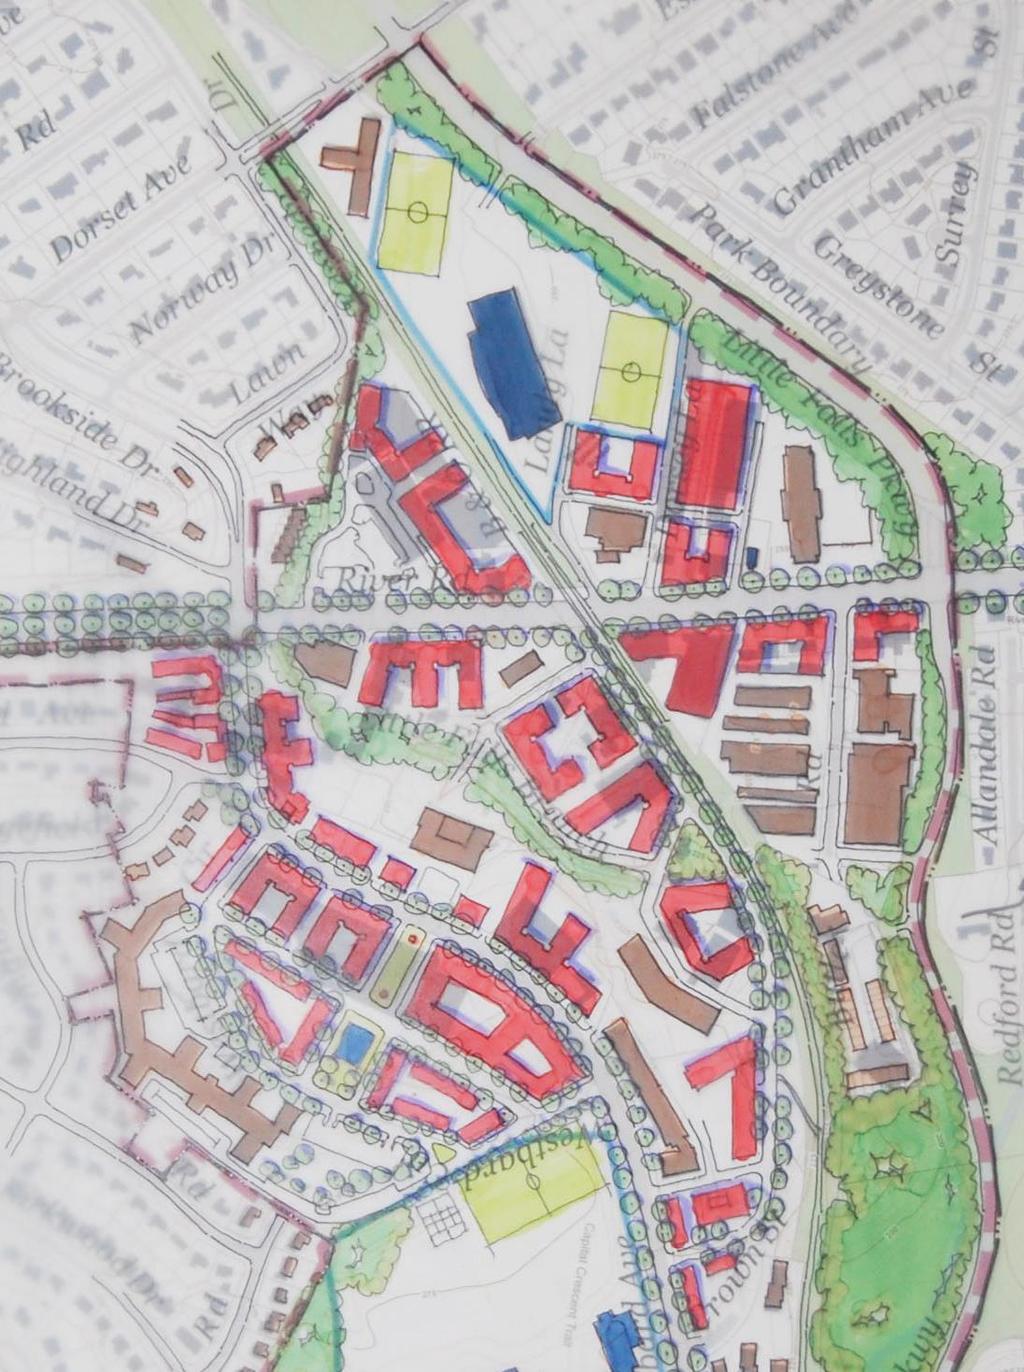 Concept 1 River Road Buildings on River Road up to 75 New Dorsey street to Little Falls Parkway New Green at Whole Foods Site Residential over Grocery Store at Whole Foods site/structured parking